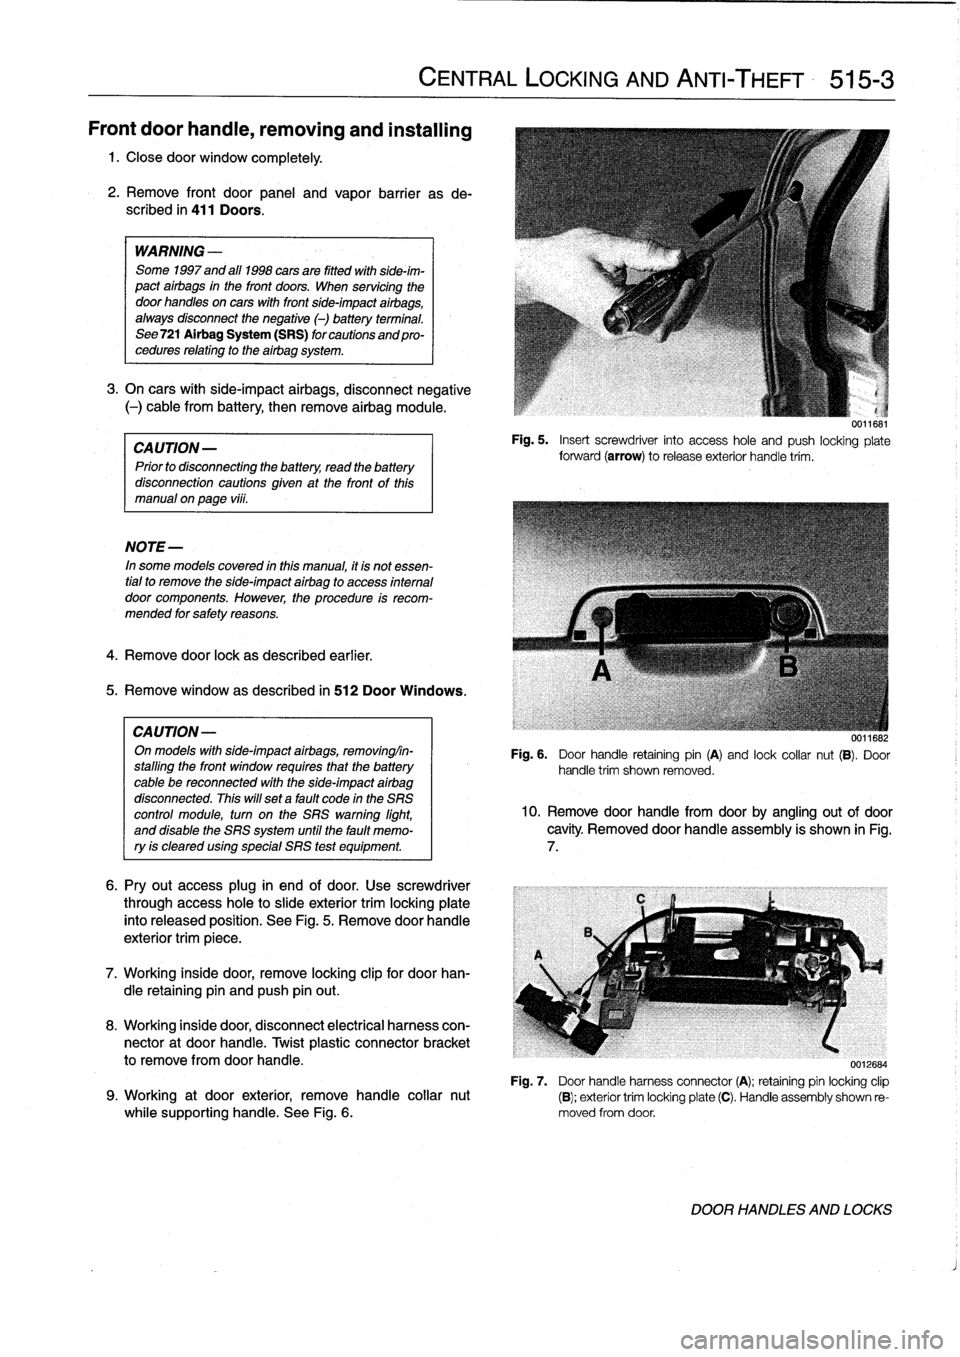 BMW 328i 1994 E36 Workshop Manual 
Front
door
handle,
removing
and
installing

1
.
Closedoor
window
completely
.

2
.
Remove
front
door
panel
and
vapor
barrier
asde-
scribed
in
411
Doors
.

WARNING
-

Some
1997
and
al]
1998
cars
are
f